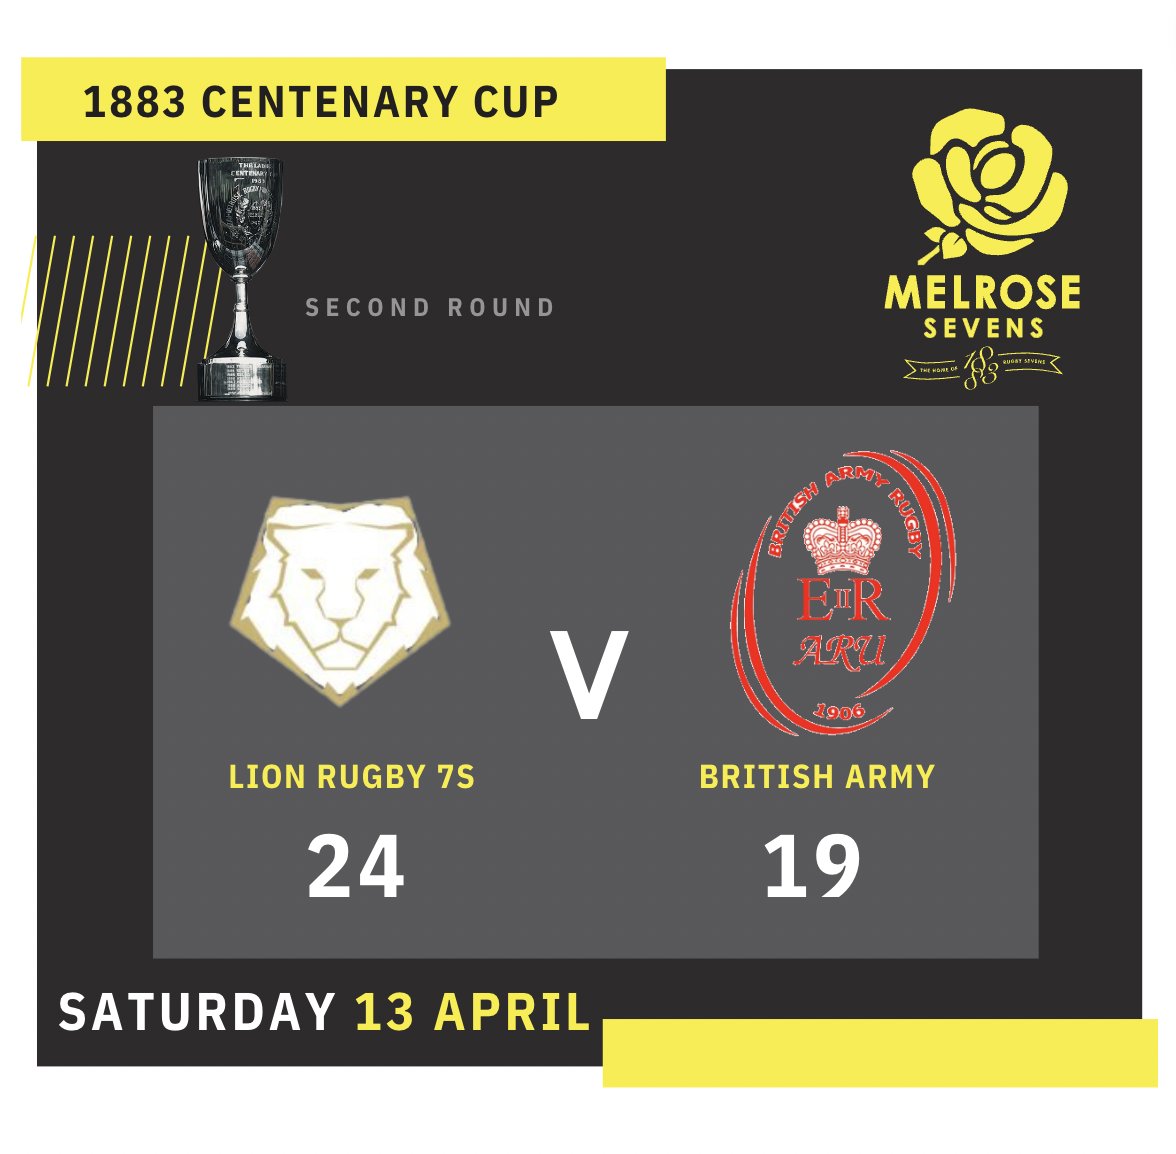 ROUND 2 FINAL SCORE Lion Rugby 7s v British Army 24 - 19 #melrose7s #melroserugby #rugby7s #scottishrugby